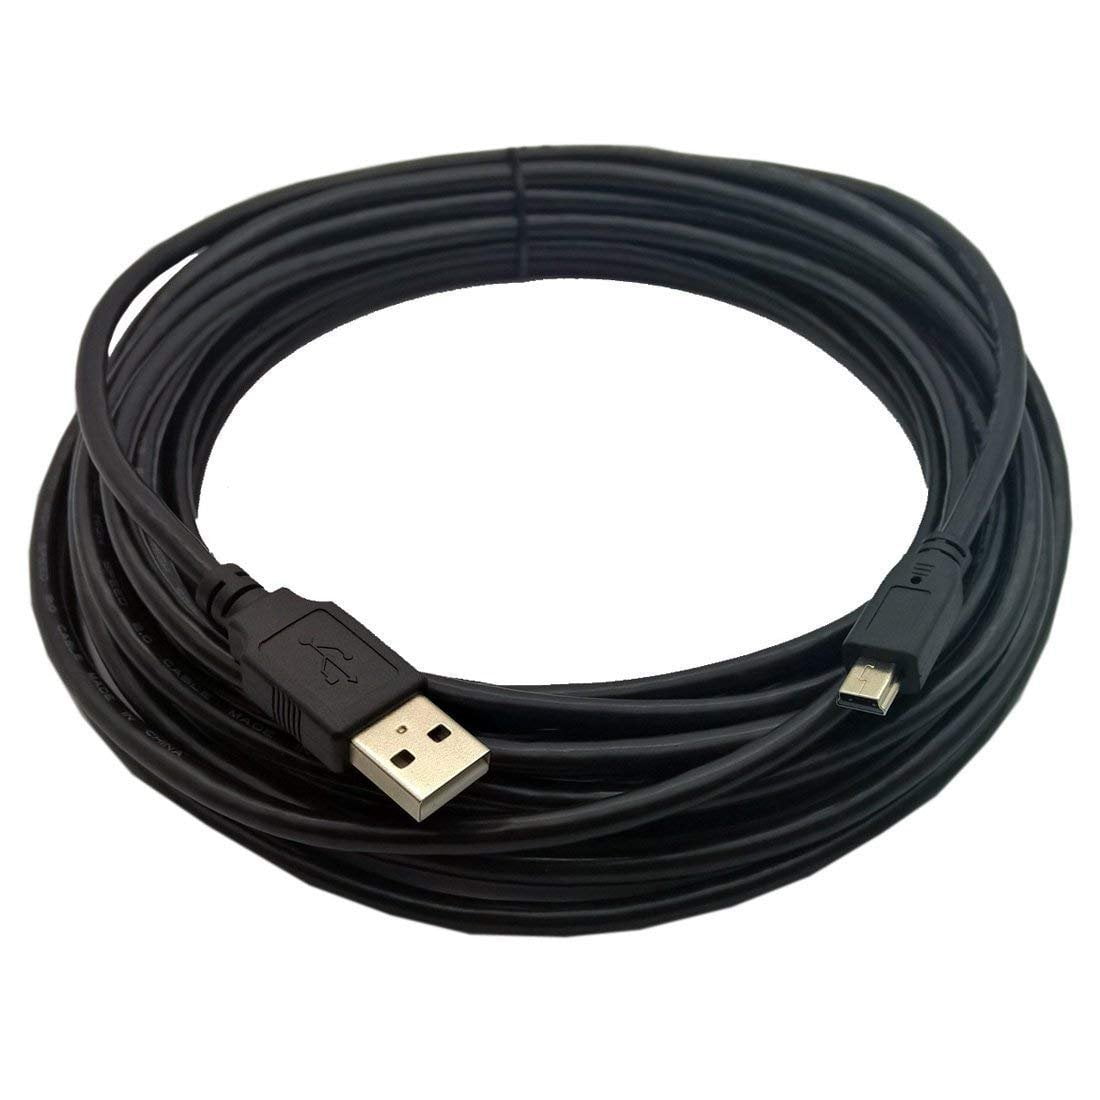 OMNIHIL 30 Feet Long High Speed USB 2.0 Cable Compatible with Zoom U-44